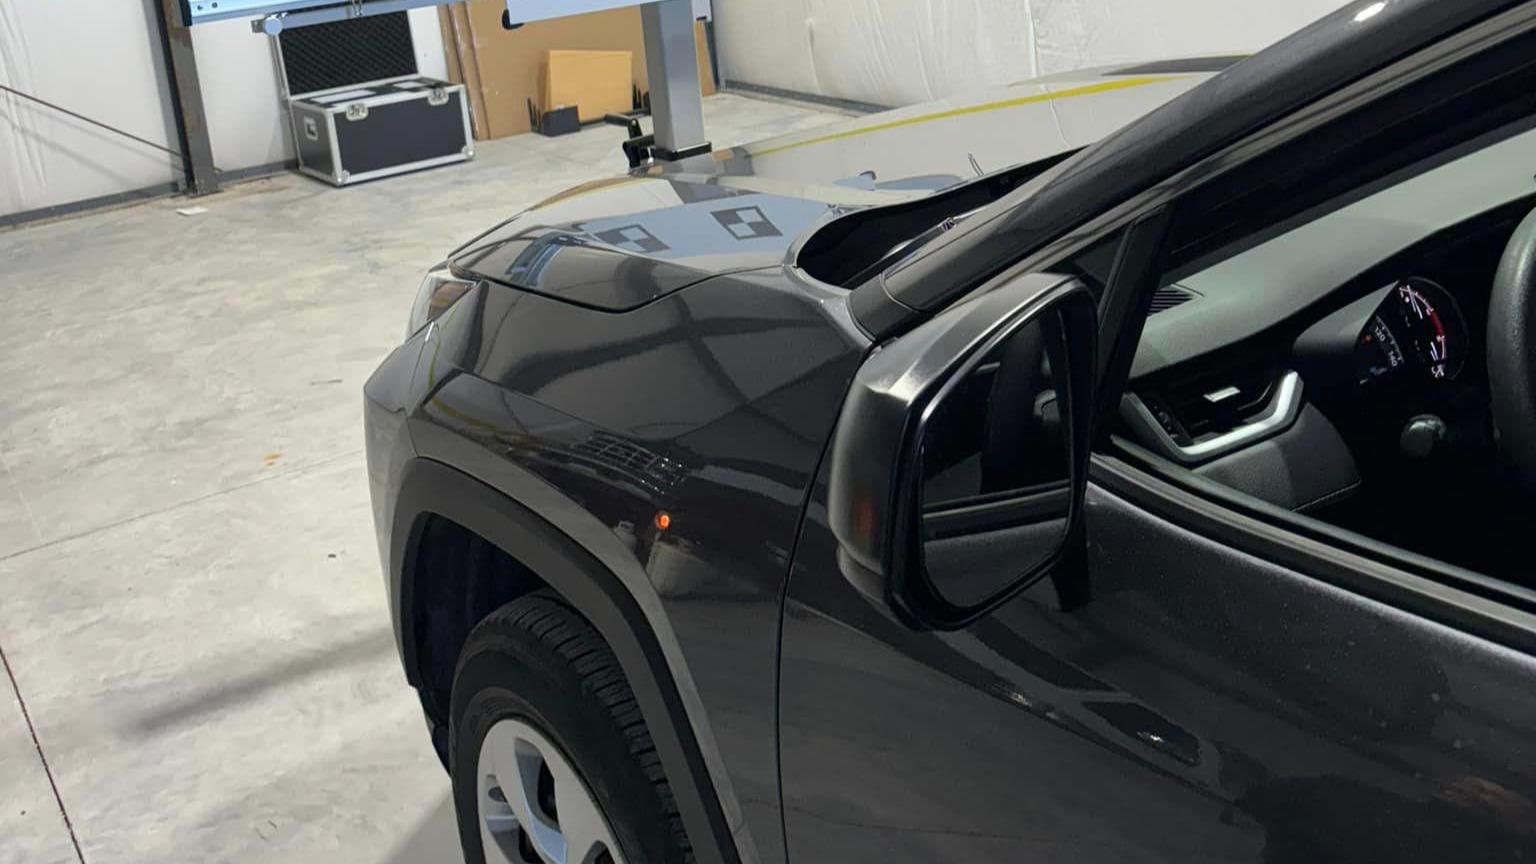 For reliable auto mirror replacement, trust ATC Auto Glass. Our owner-operated service ensures a seamless mirror replacement process, swiftly addressing any damage or wear to your vehicle's mirrors, so you can maintain complete control and safety while driving.